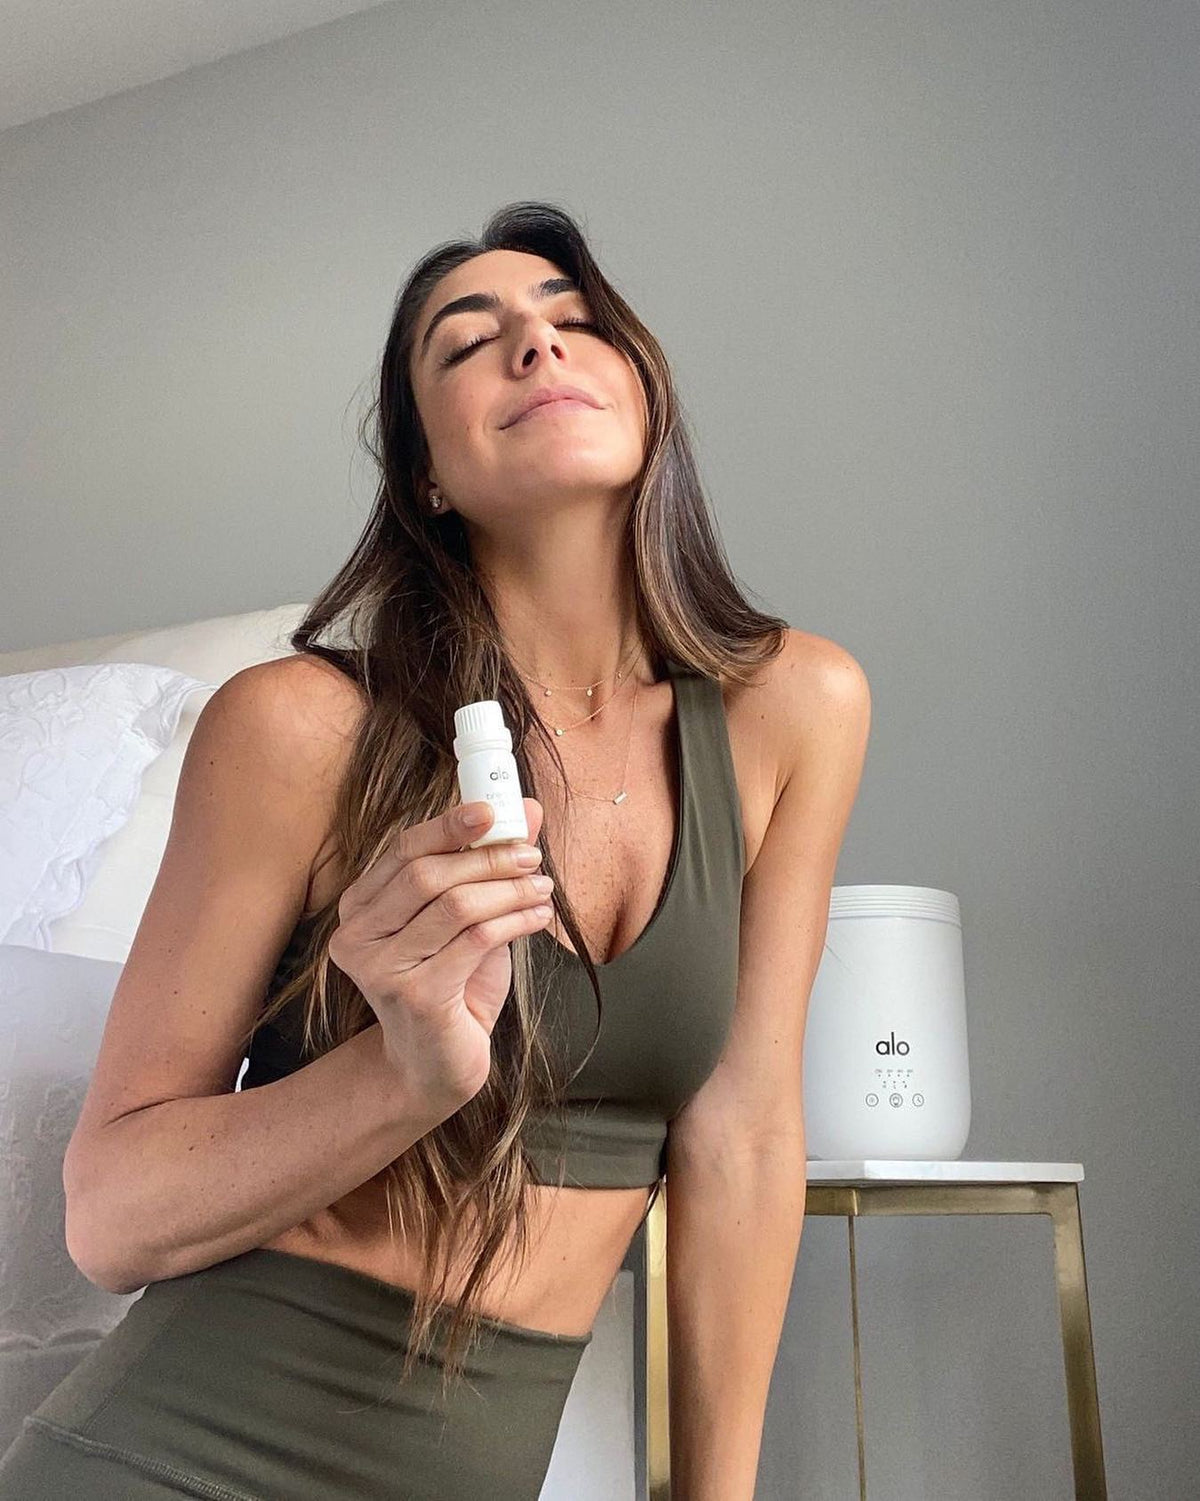 @revolveactive post of woman with long brown hair posing with Alo essential oil bottle and aura diffuser behind her on an end table. 